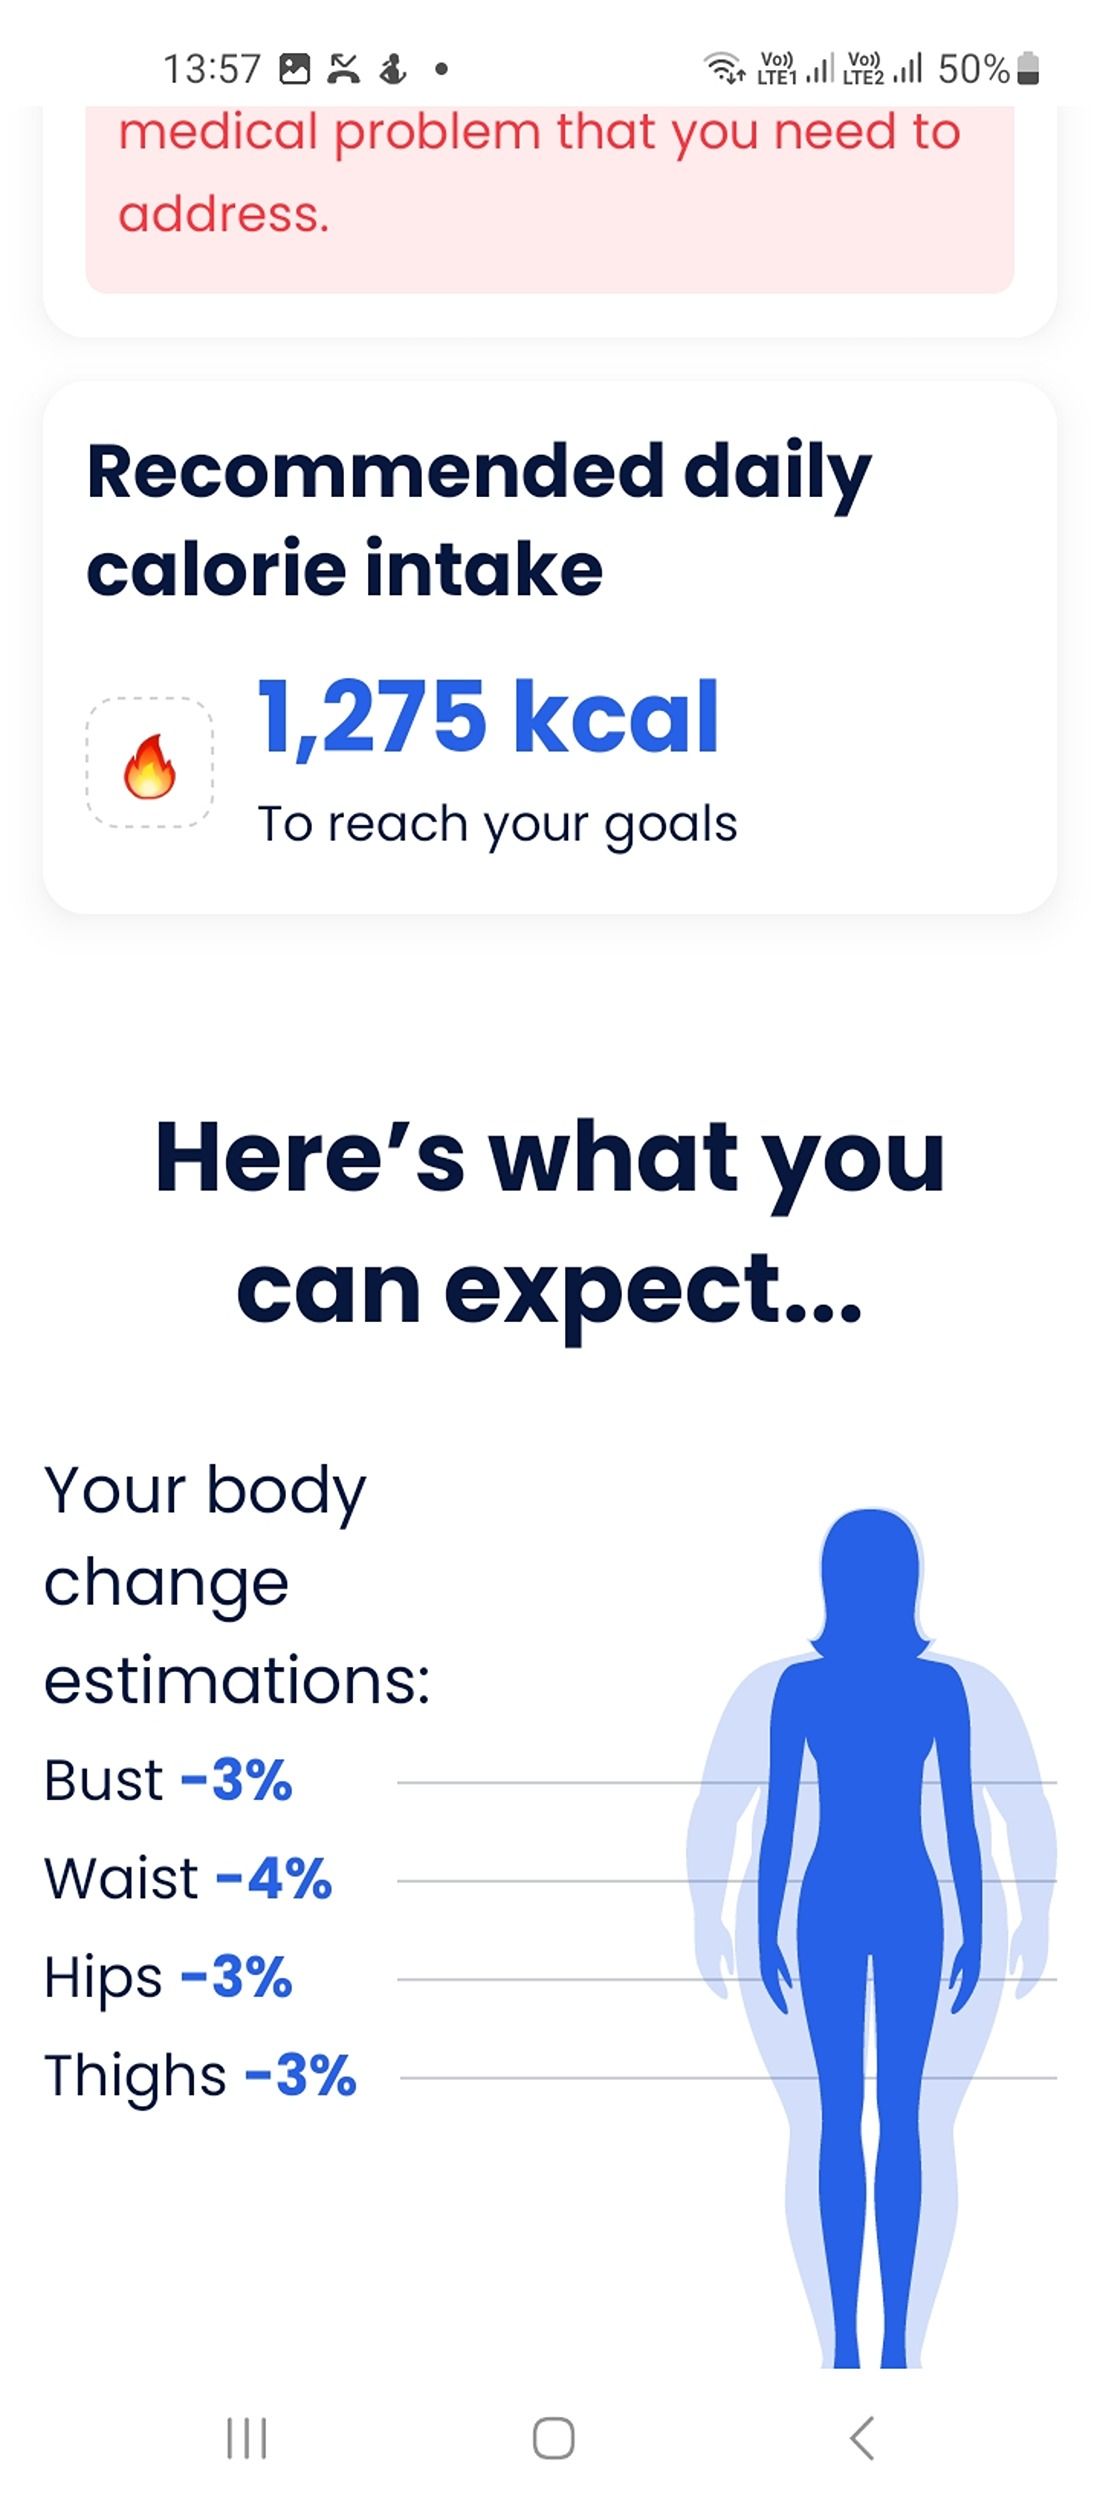 Expected outcomes in the Cardi-health app